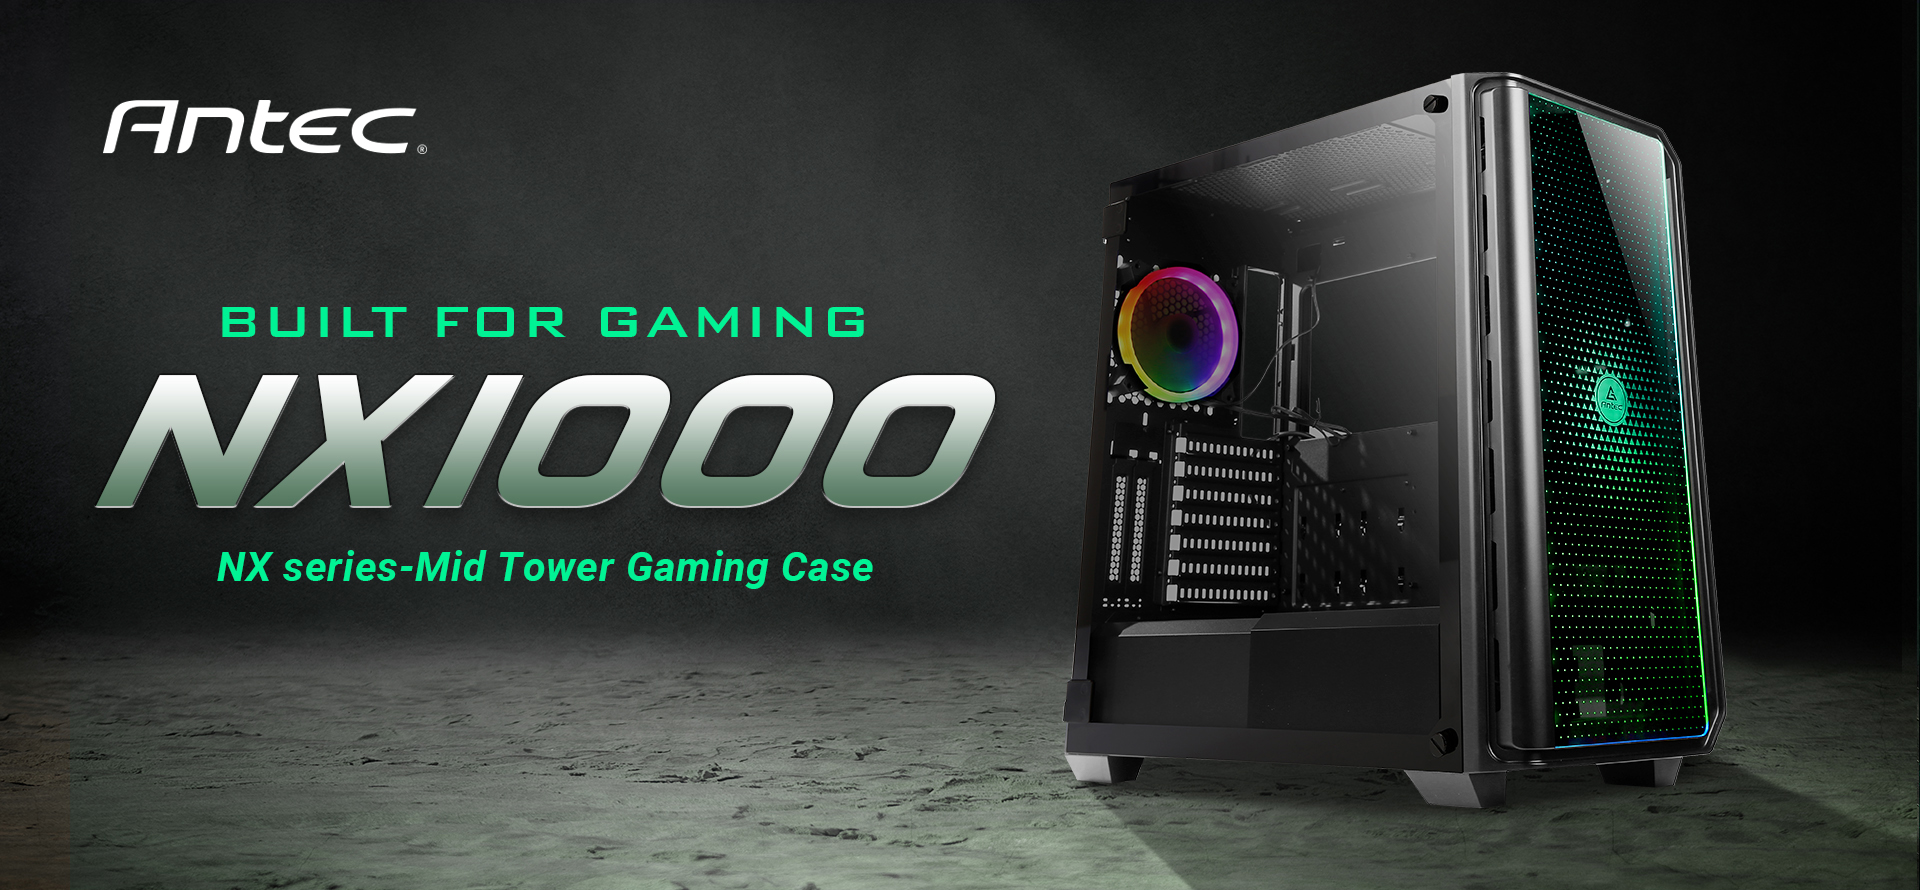 The Antec NX1000 Gaming Case Is Now Available For Purchase, It Features RGB Lighting And Supports Up To 6 Fans